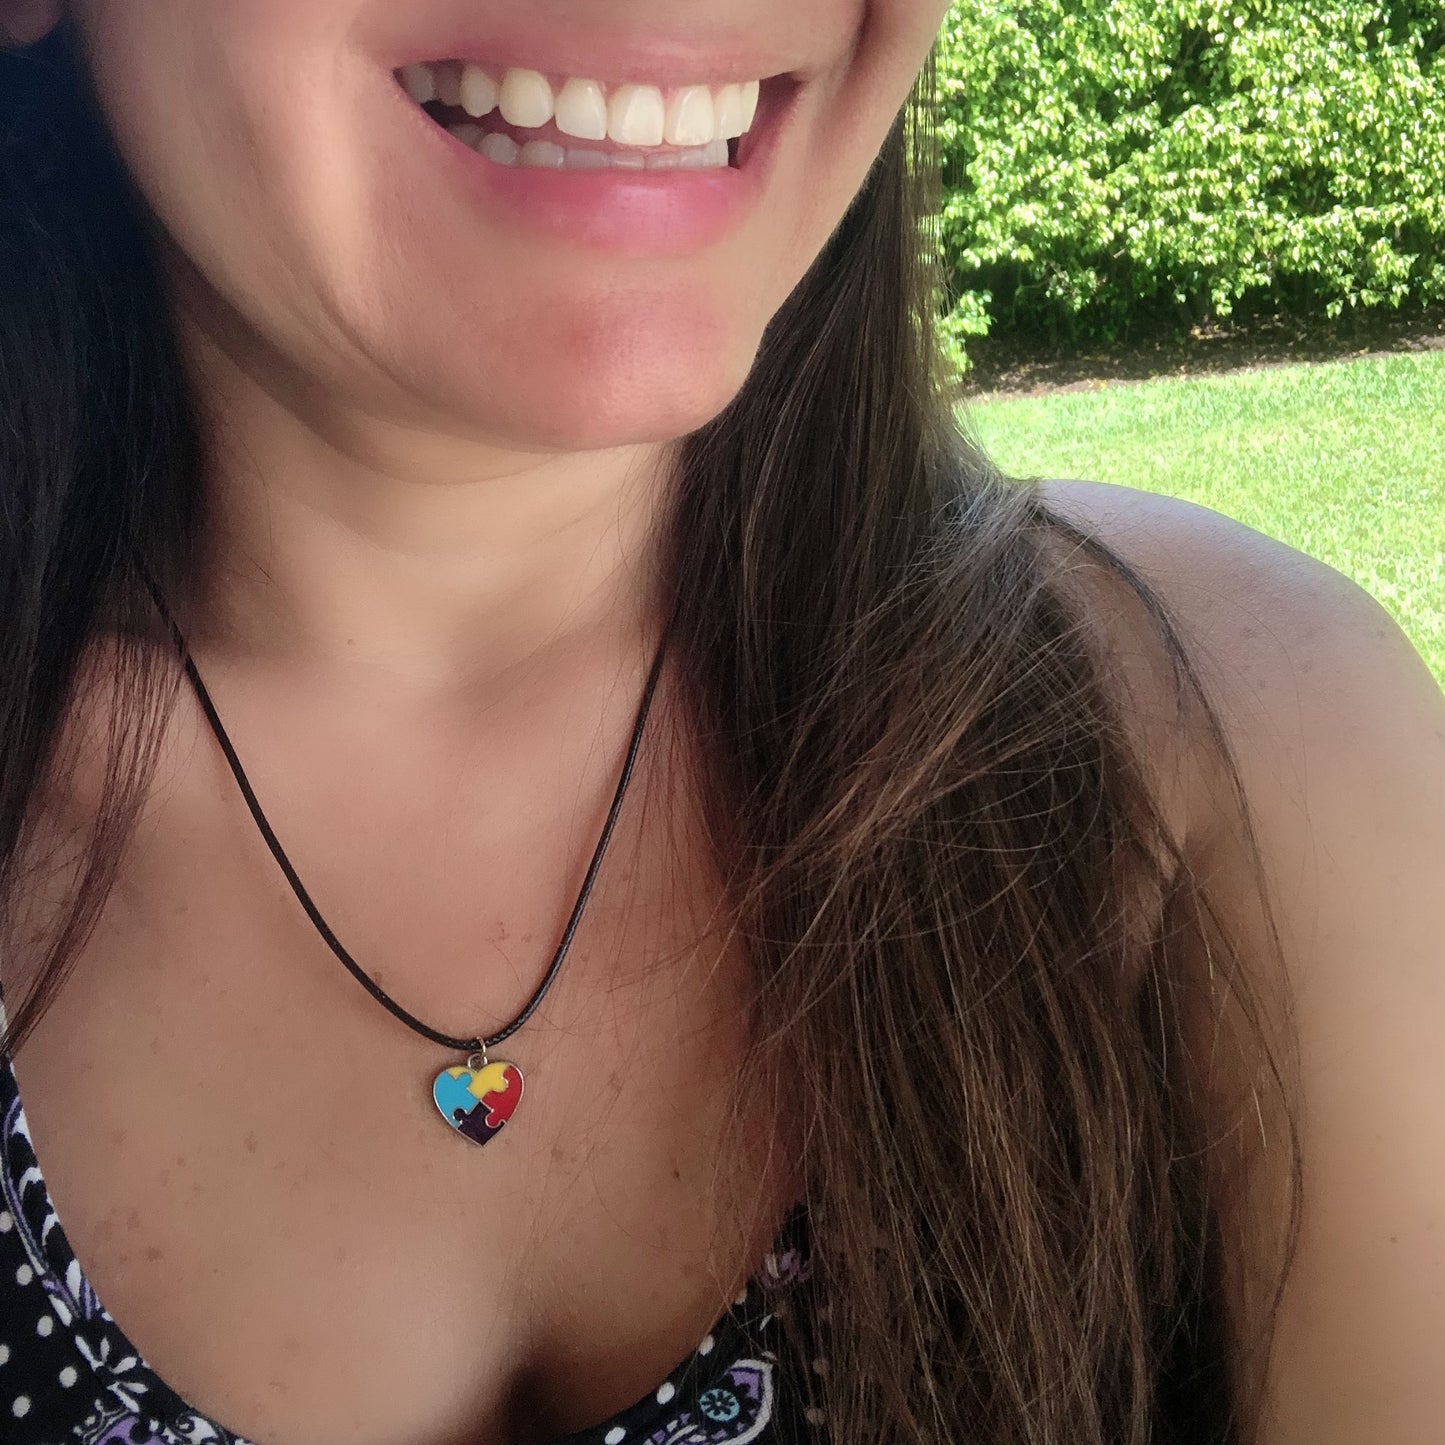 Autism Heart Charm with leather necklace